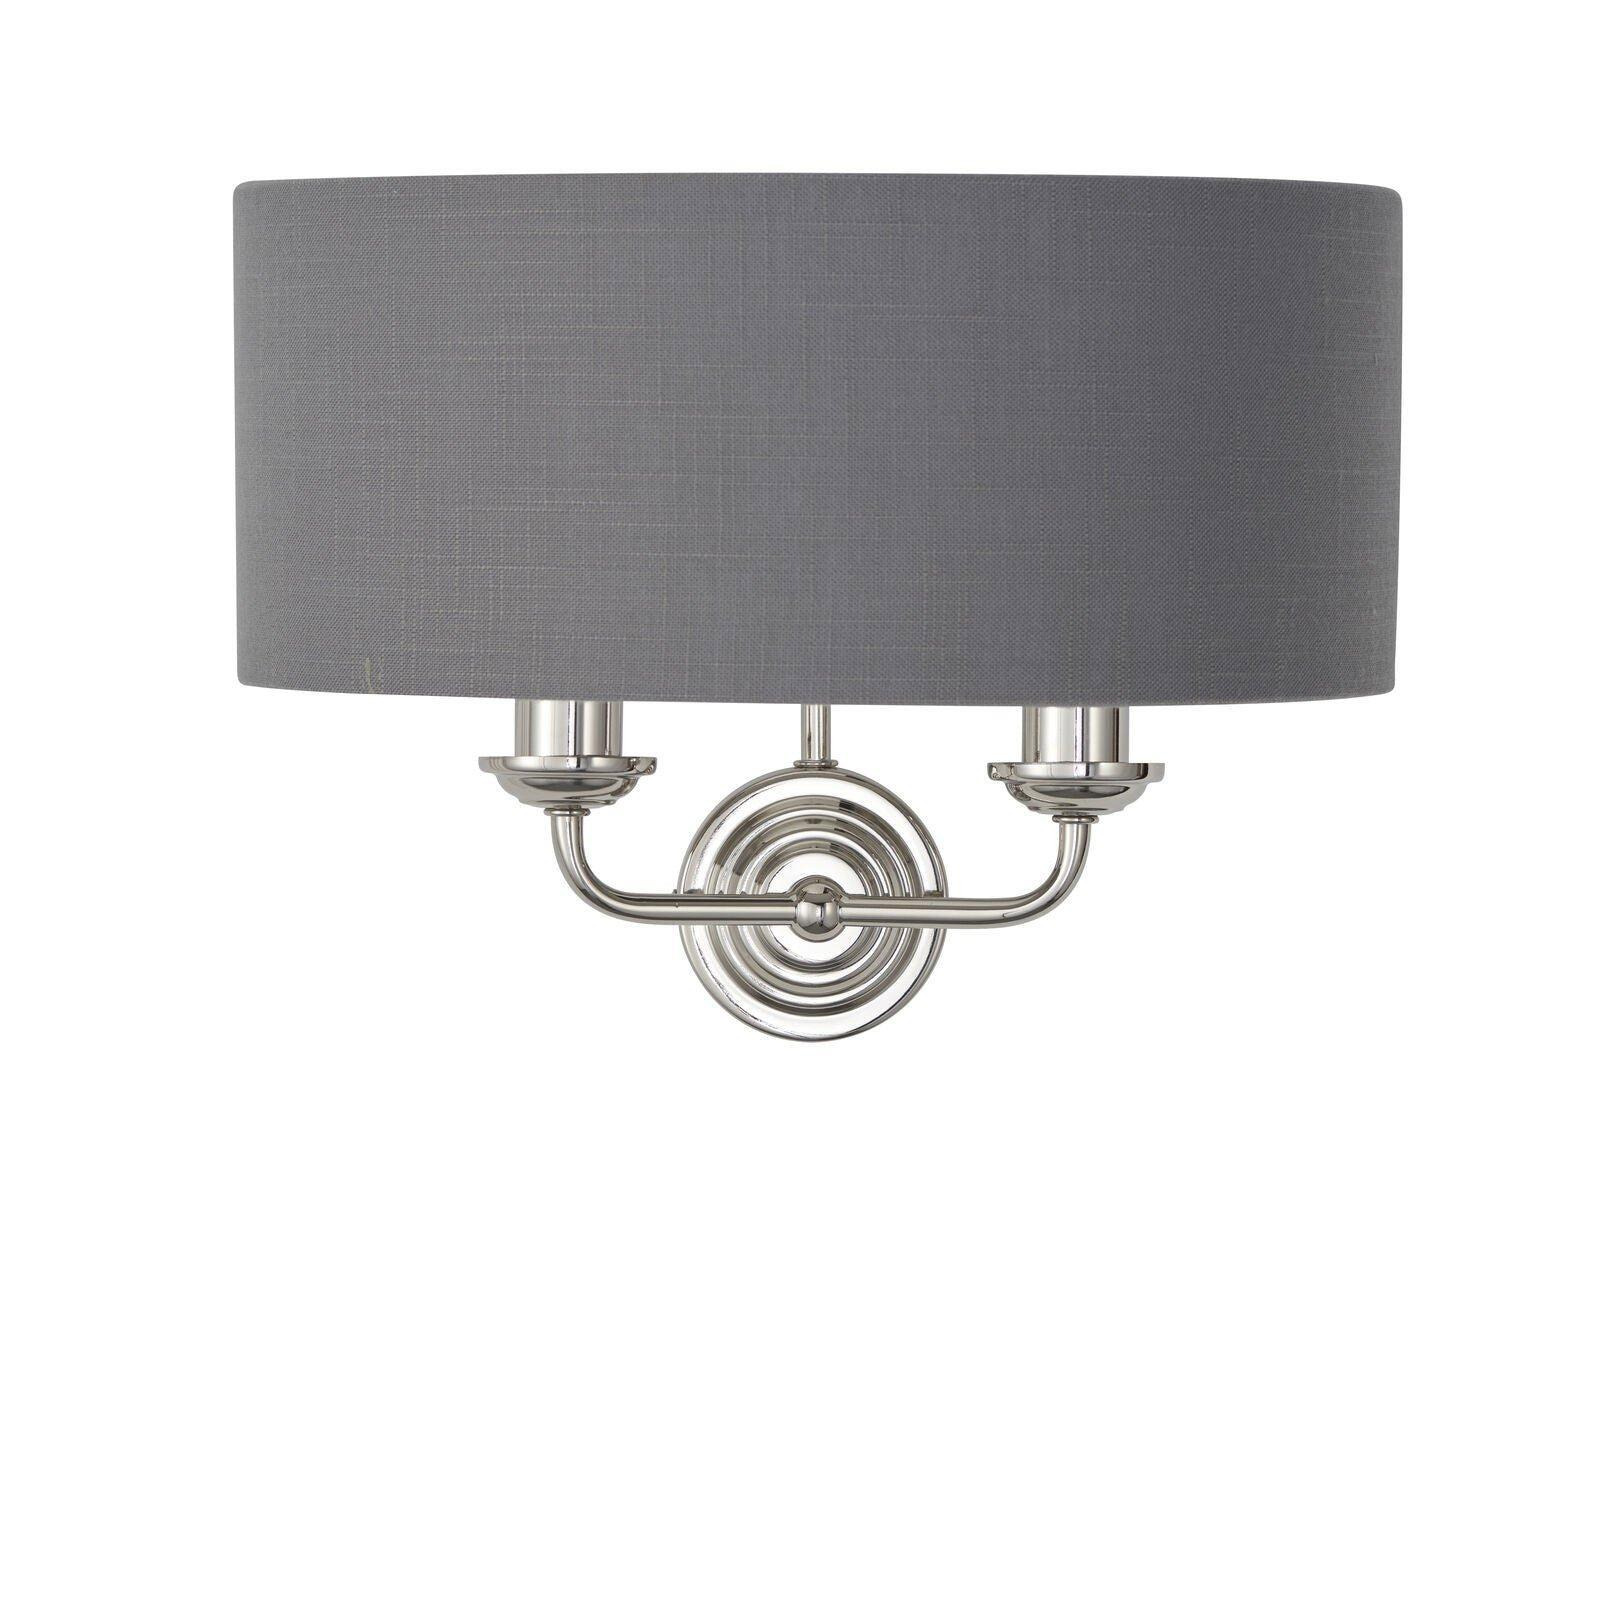 Wall Light - Bright Nickel Plate & Charcoal Fabric - 2 x 40W E14 - Dimmable - image 1